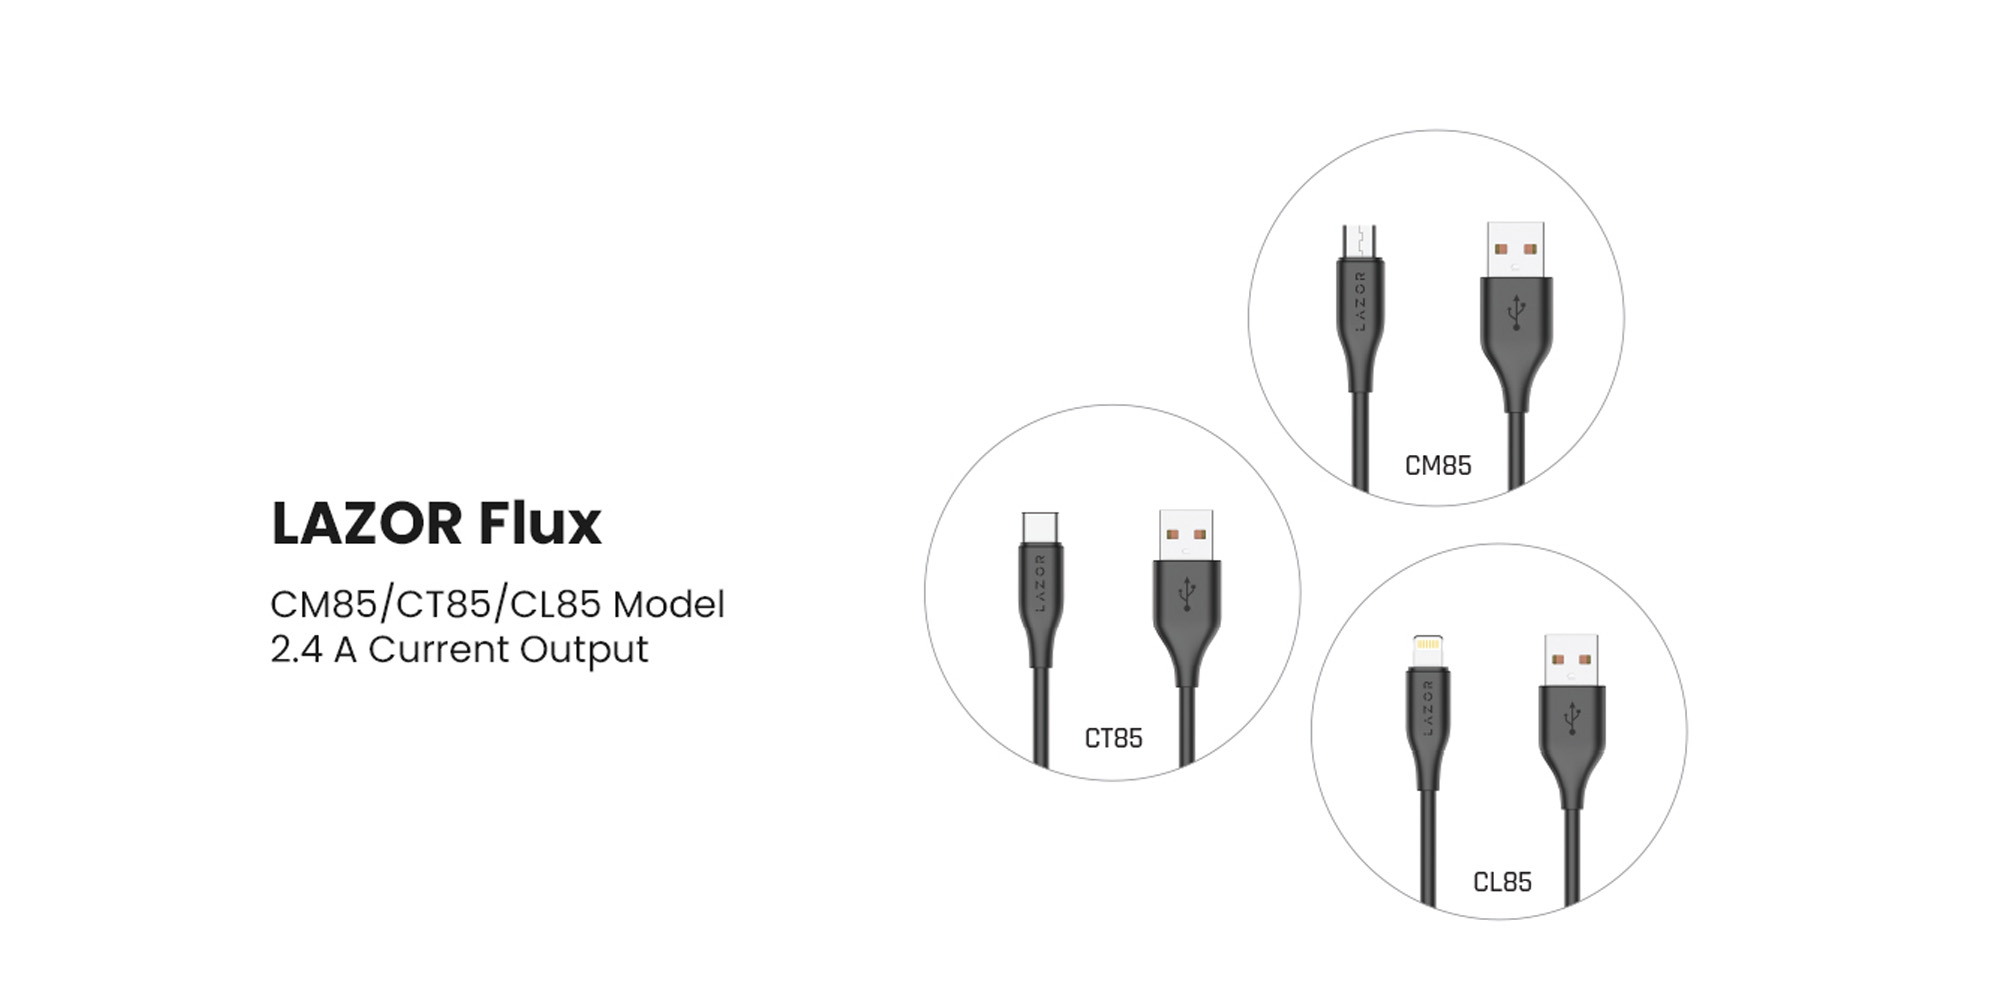 Lazor Flux CM85: USB-A to Micro-USB Fast Charging Cable, 1 Meter Length, 3A Fast Sync and Charge, Black